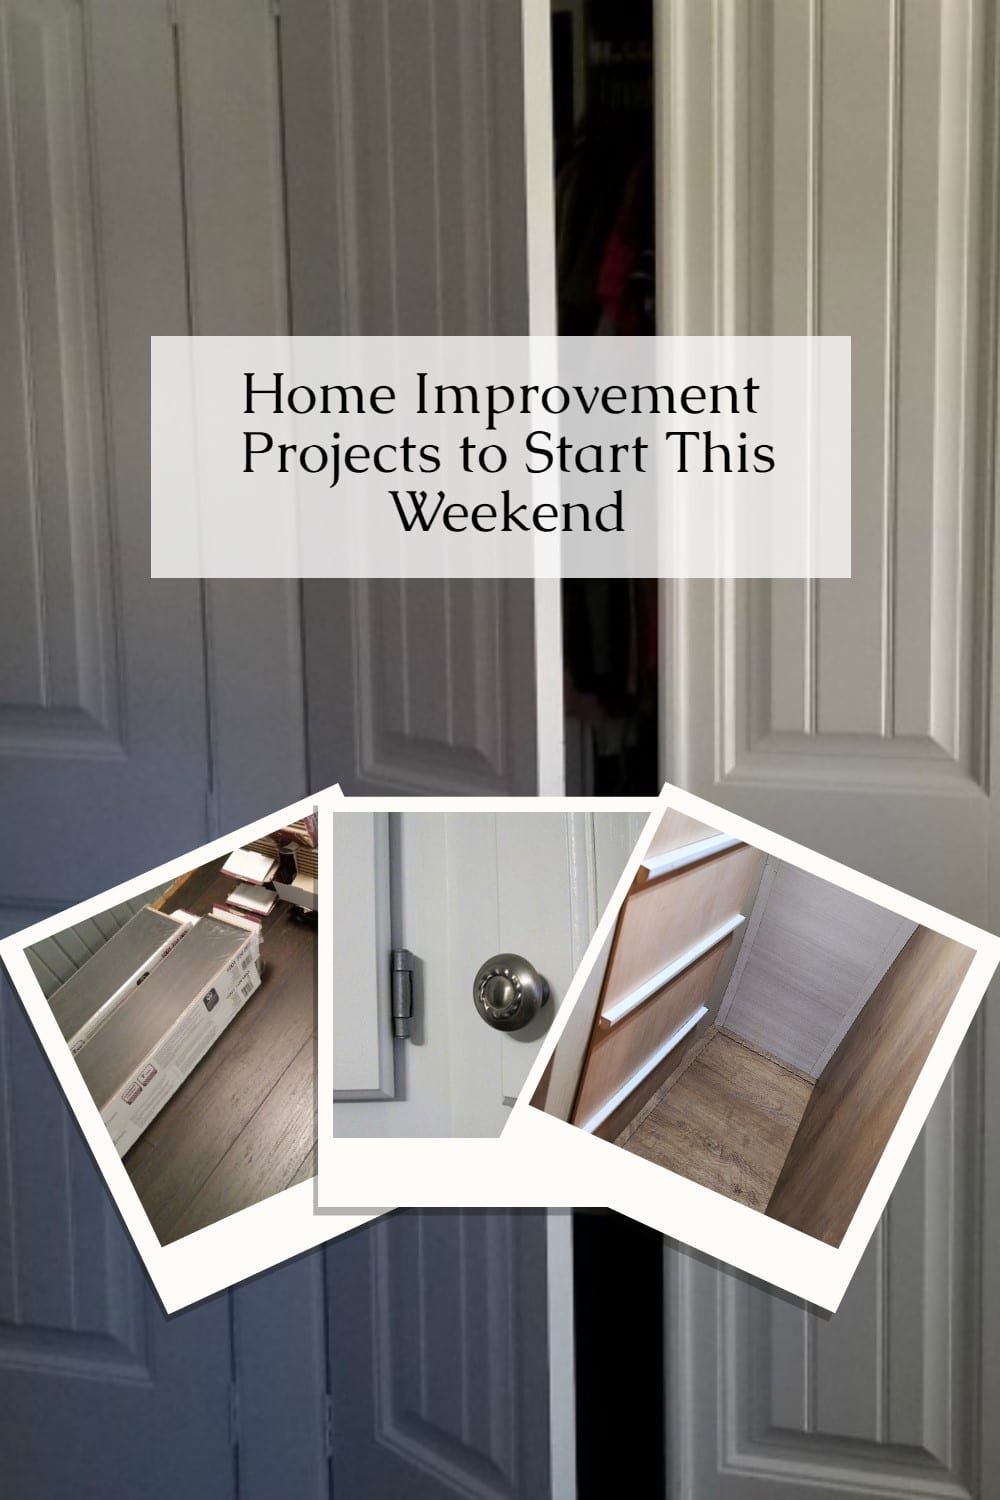 Home improvement ideas for all skill levels. Projects include, painting, closets and organization, and changing out your flooring. via @repurposedlife